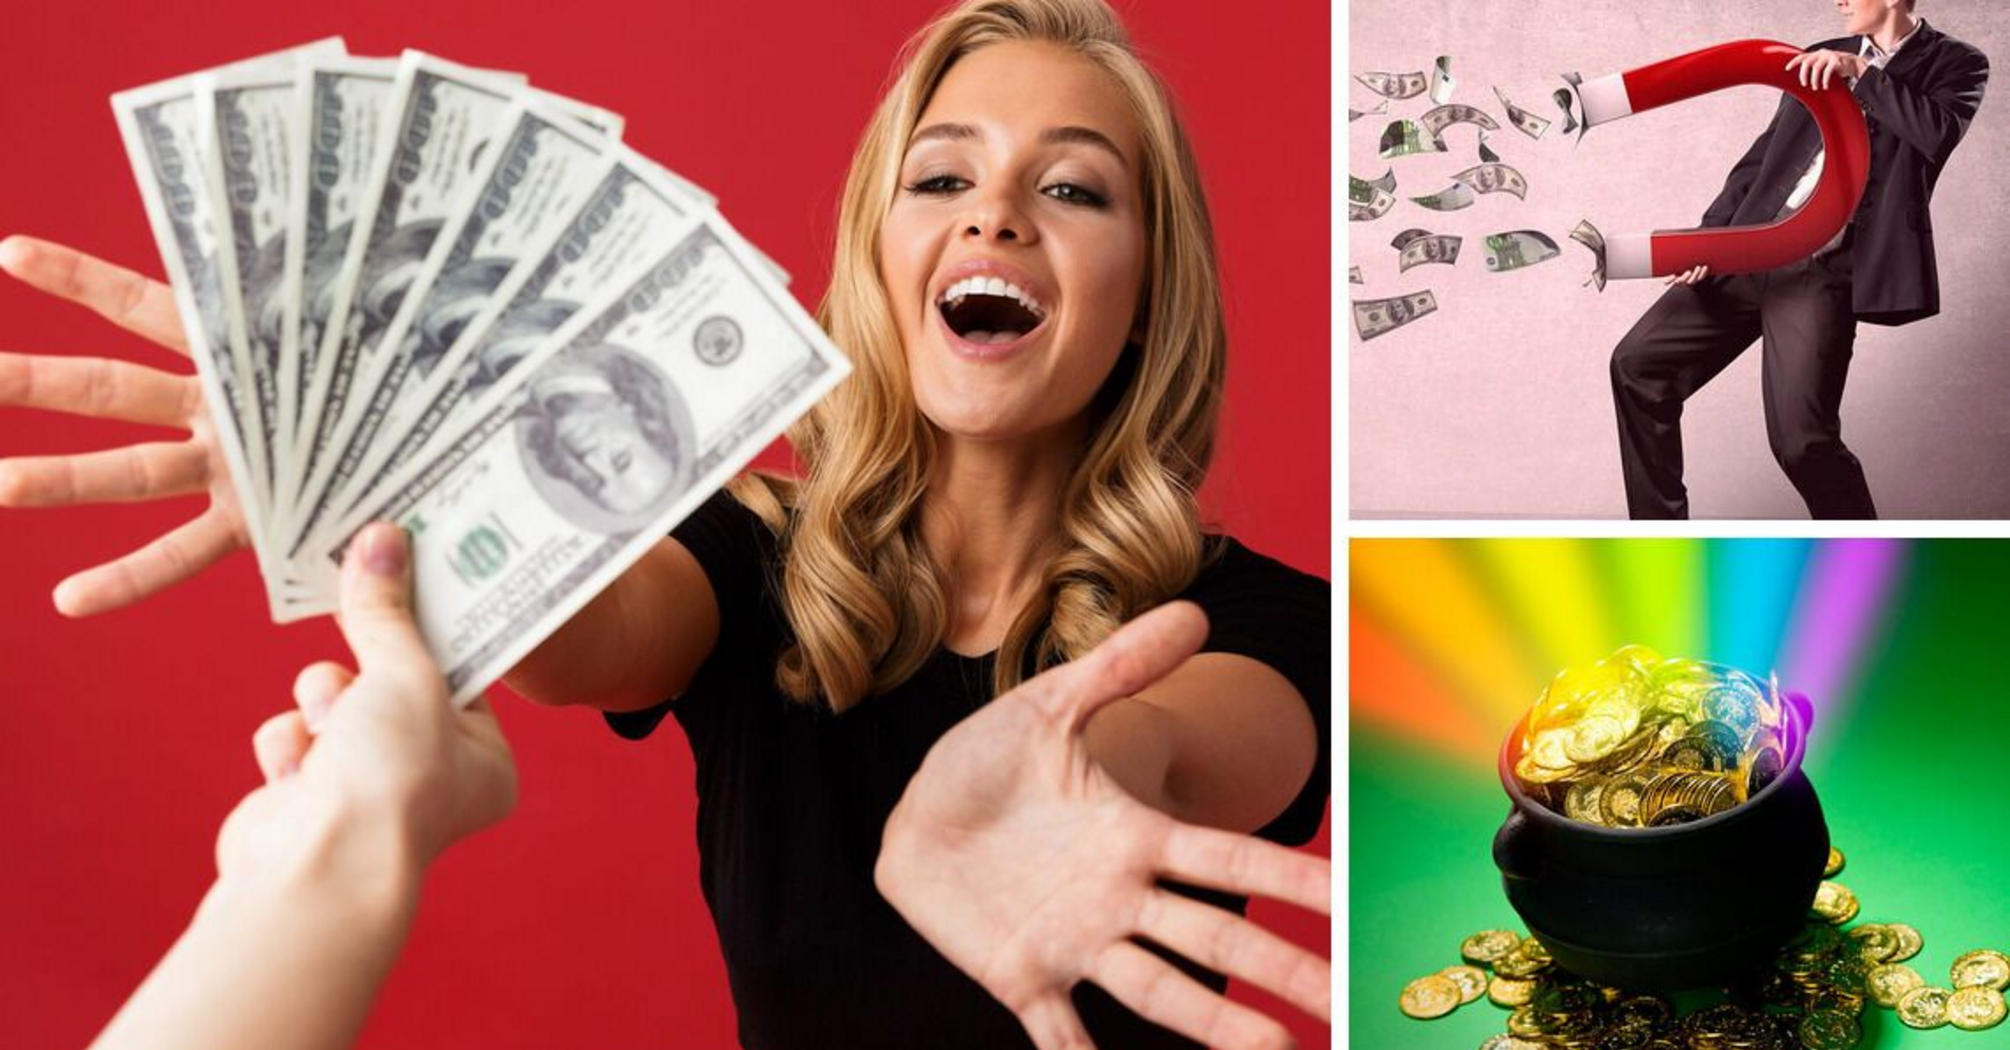 Three zodiac signs have been named that attract money like a magnet